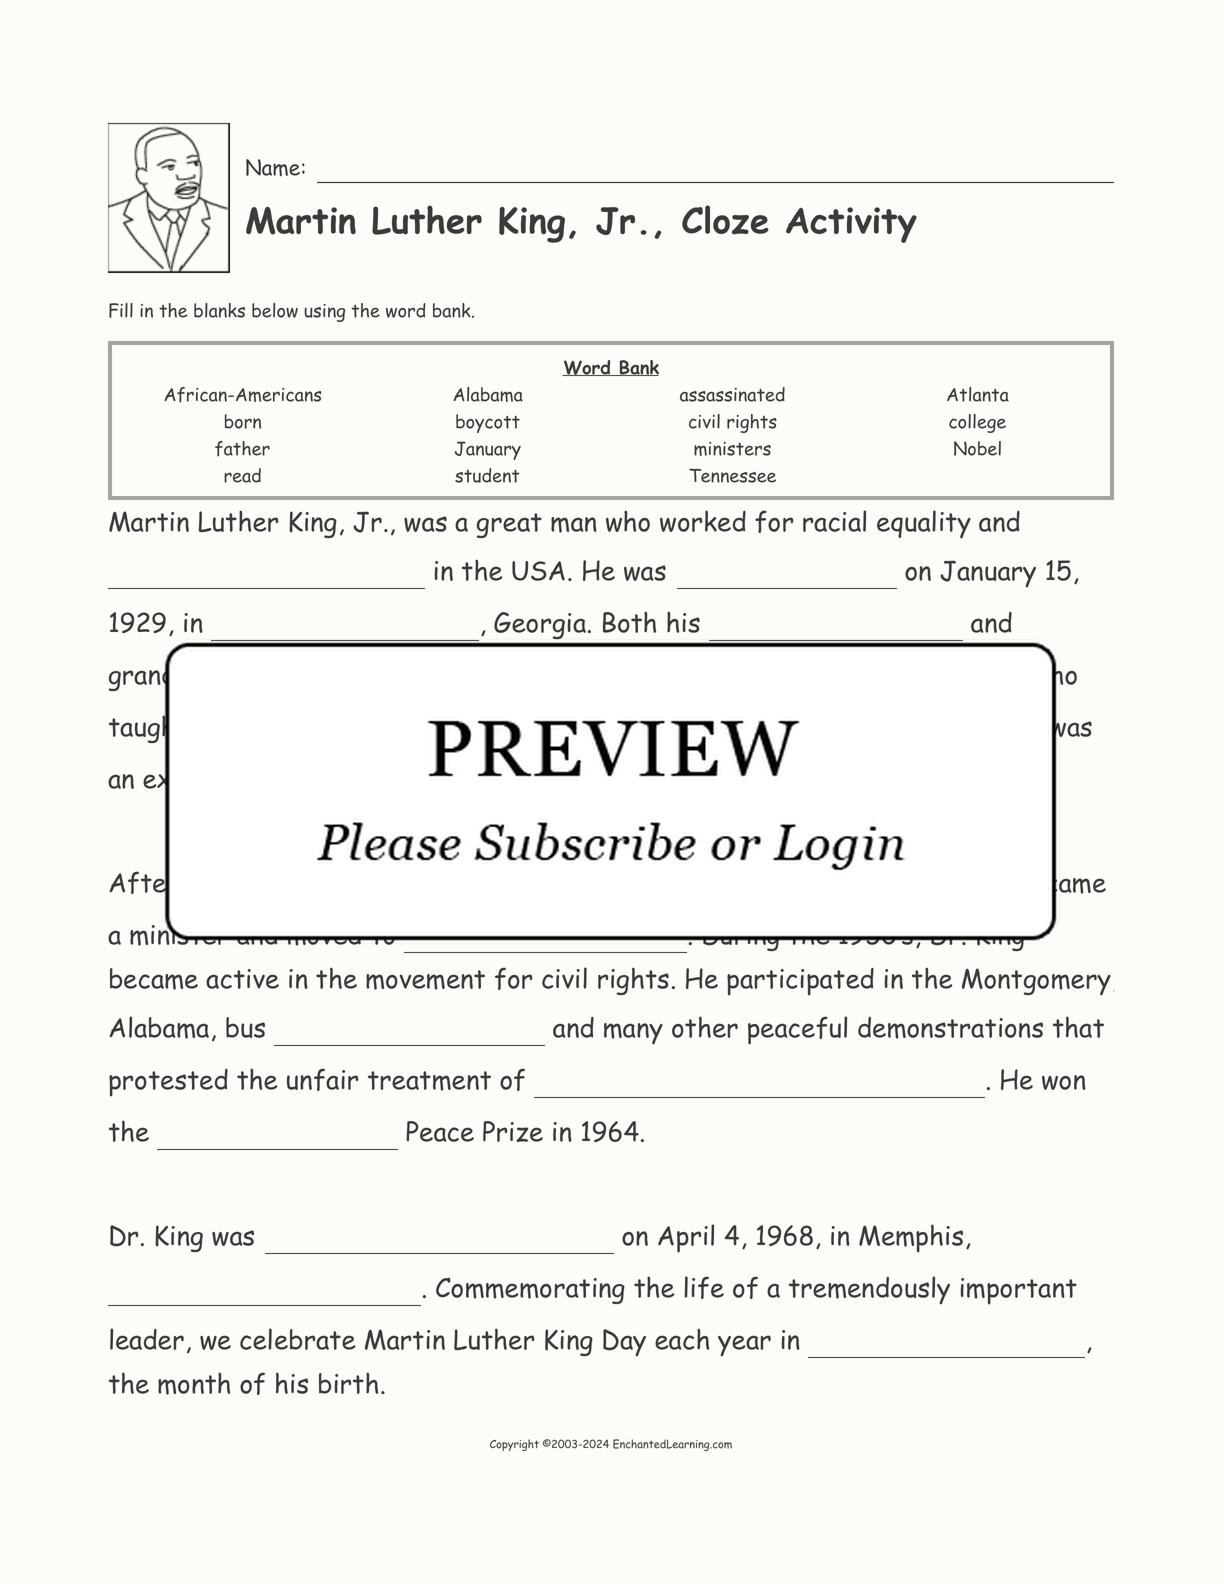 Martin Luther King, Jr., Cloze Activity interactive worksheet page 1